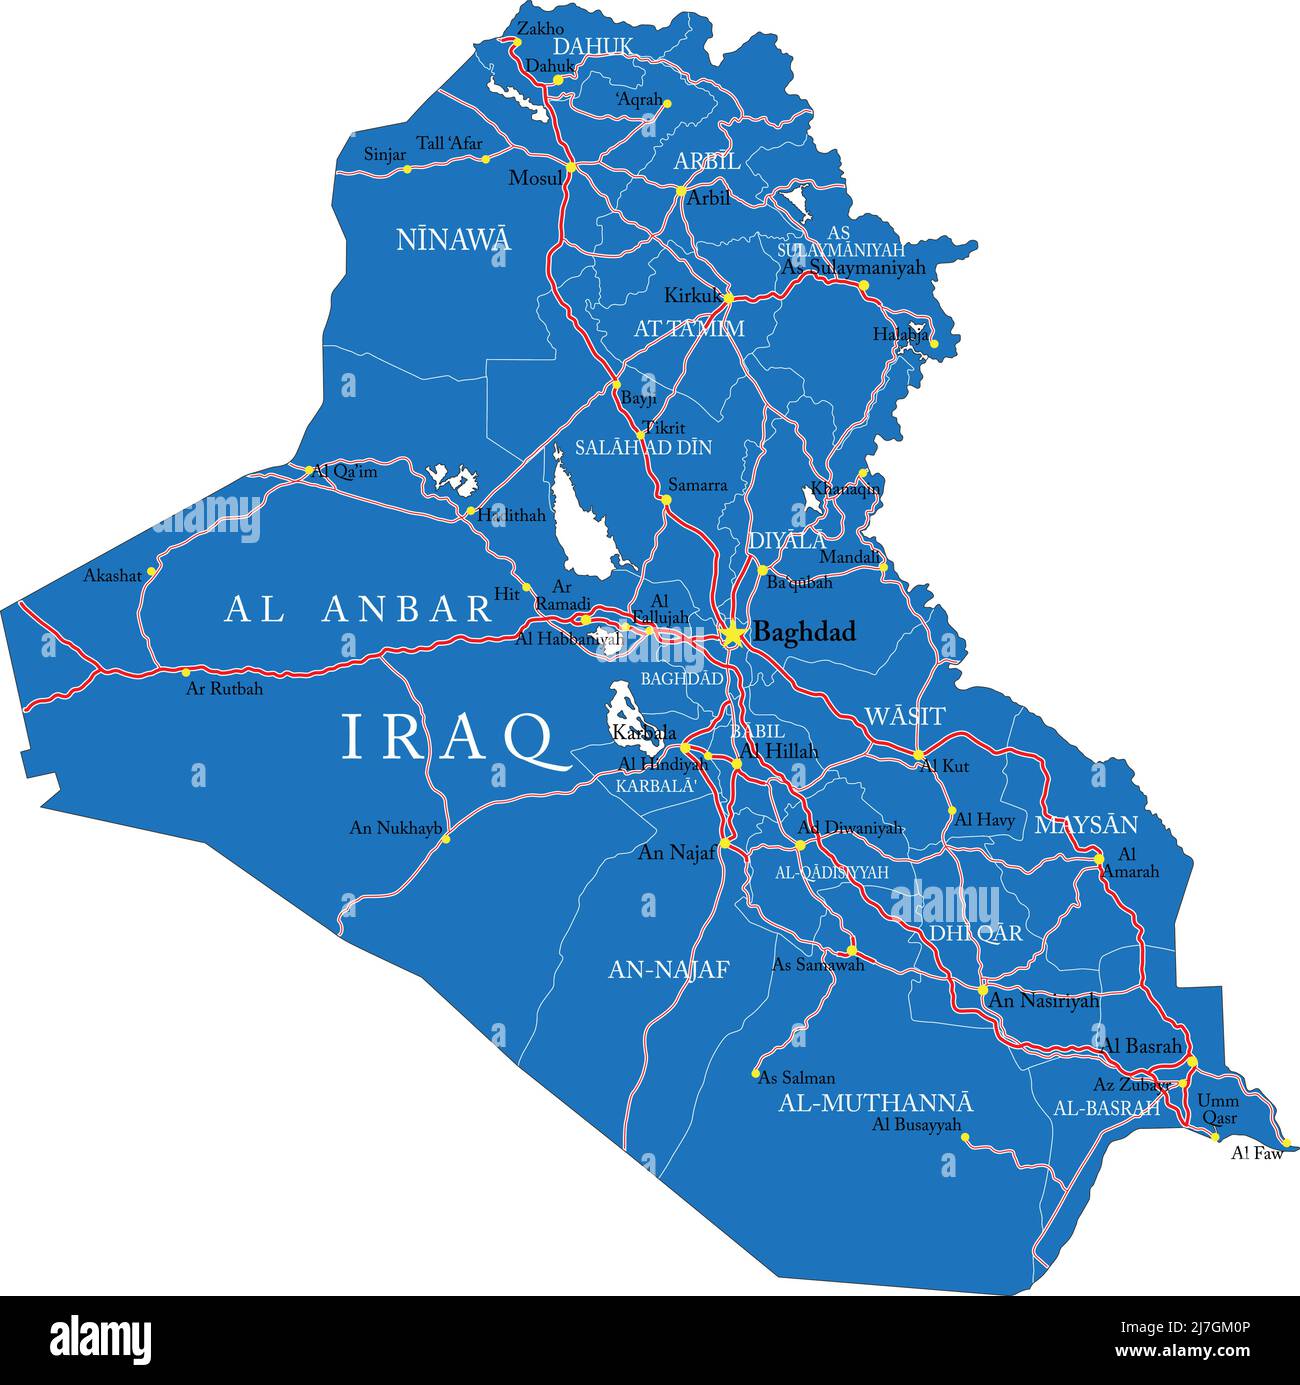 Highly detailed vector map of Iraq with administrative regions, main cities and roads. Stock Vector